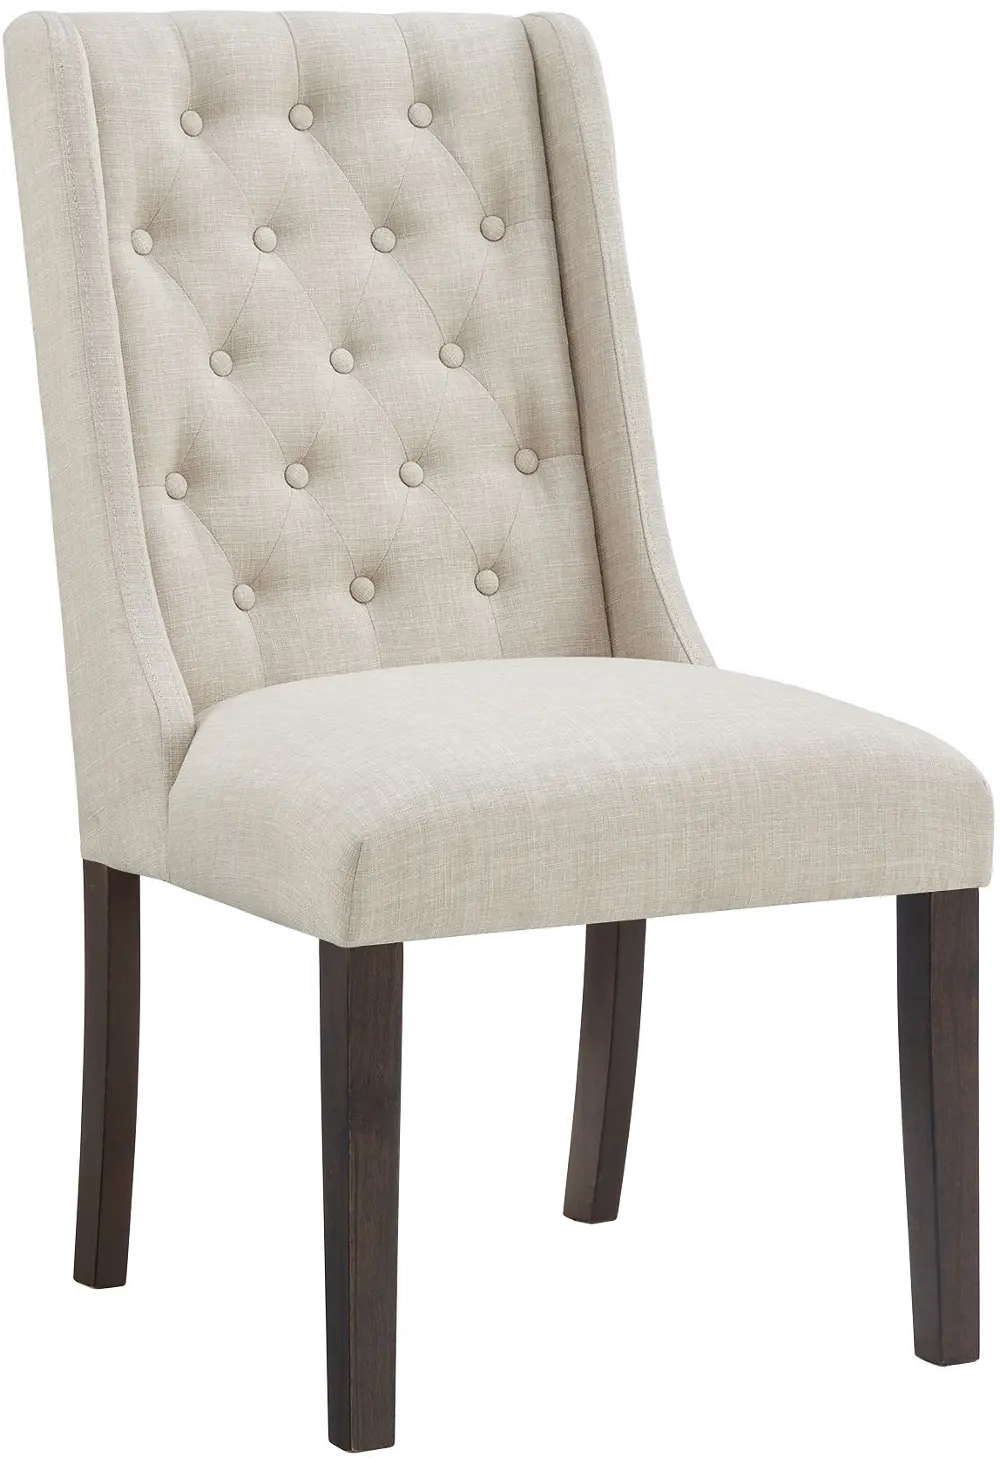 Manor Gate Cream Upholstered Dining Room Chair-1